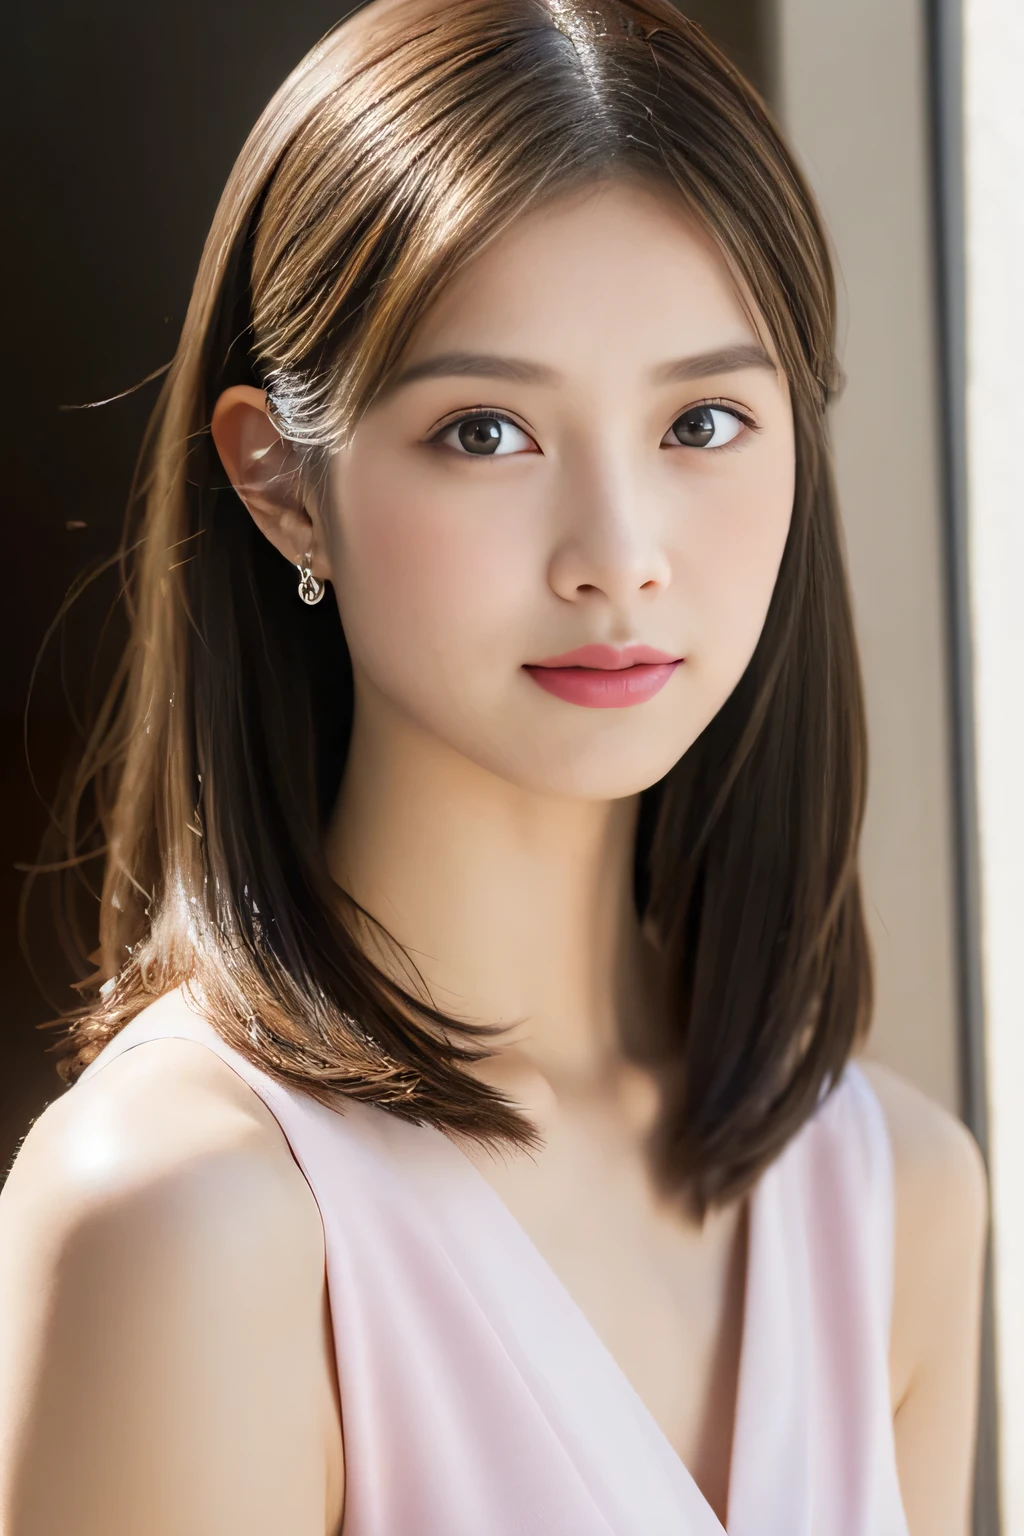 ((highest quality, 8K, masterpiece :1.3)), (realistic, Photoreal:1.4), sharp focus：1.2, 
Bright colors, professional level, shallow depth of field, 
20-year-old, (Half Japanese and half German woman), 1 person, A beautiful face with intelligence, 
Supple body :1.3, model body shape:1.5, 頭w:1.4, perfect style：1.4, 
narrow shoulders, beautiful clavicle, long and thin legs, The beauty of slim abs :1.2, thin waist :1.2, 
super detailed skin, Fair skin, Shiny skin, 
super detailed face, slim facial contour, beautiful small face, Beautiful lined nose, 
super detailed eyes, long slit eyes, brown eyes, double eyelid, beautiful thin eyebrows, fine long eyelashes, 
super detailed lips, plump lips, glossy pink lips, flushed cheeks, beautiful teeth, 
Beautiful actress&#39;s ennui makeup, pink lipstick, silver necklace, earrings, 
light brown hair, delicate soft hair, 
(hair up, ponytail :1.2), layer cut, (dull bangs:1.2), 
(Dress up with trendy fashion:1.2), 
gentle smile, open mouth half way, Enchanted expression, stare at the camera, 
(Full body image from the waist), dynamic lighting, 

((She is completely naked and wearing a thin blouse.)),  
(perfect breast shape, B cup:1.2), A small pink areola, 
She has a cute plump butt, My thighs are dazzling, 
(standing in a beautiful posture:1.2), 
(facing forward, Show me your whole body, pay attention to your feet:1.4), 

White House on Santorini, blue sky and aegean sea, 
cinematic lighting, midsummer rays, 